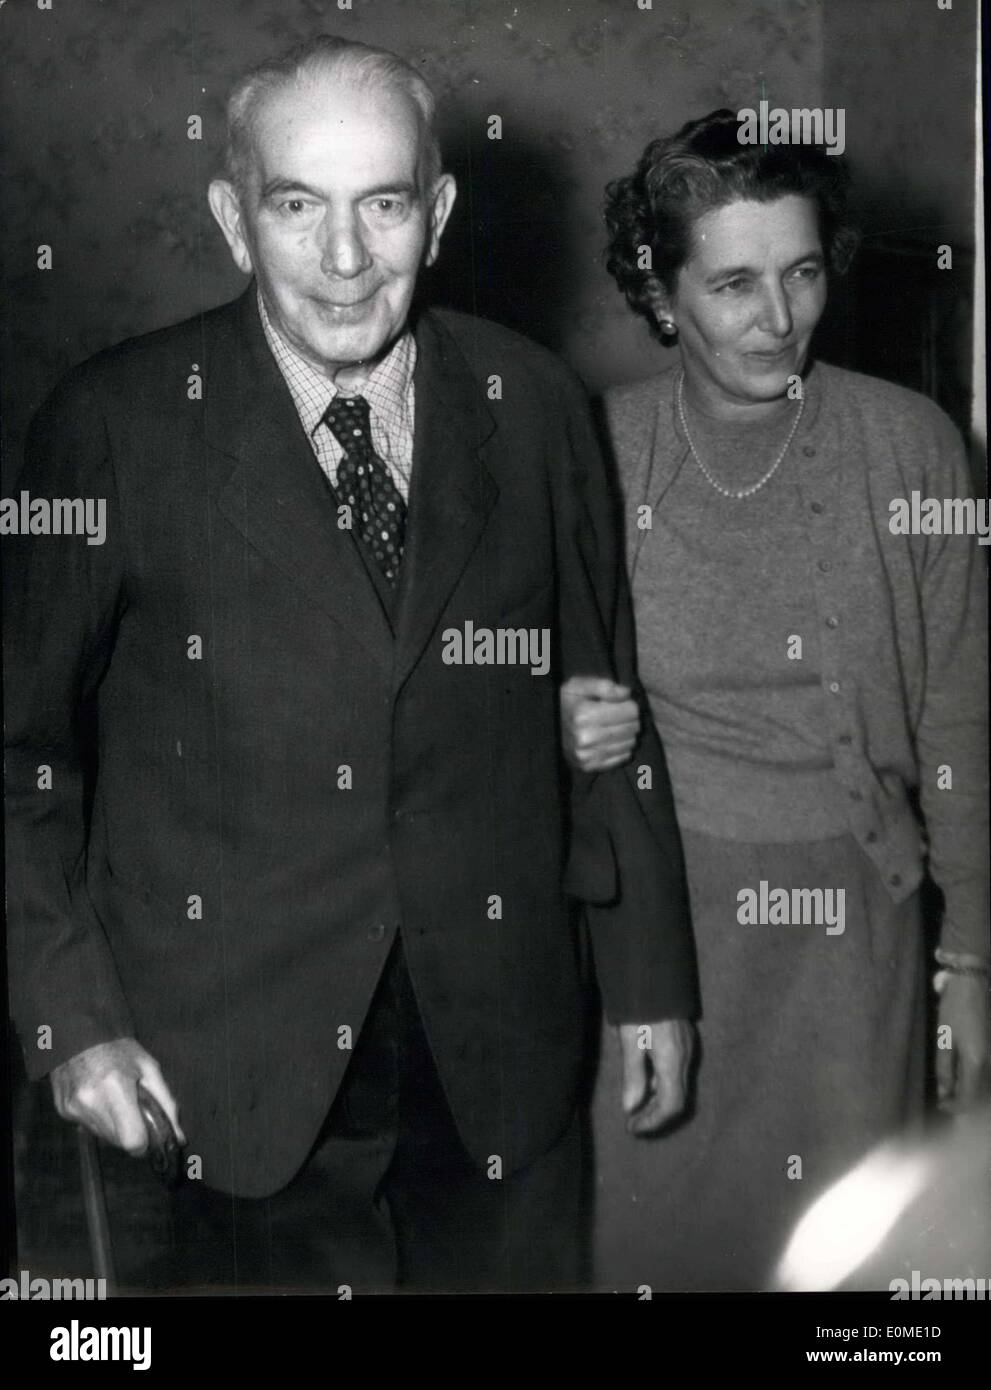 Nov. 06, 1954 - The former Foreign Minister, Konstantin von Neurath, who was sentenced to 15 years in prison at the Nuremberg trials, was released on Sunday from the Spandauer War Criminals Prison. Our picture shows the sickly von Neurath with his daughter Winifried von Mackensen after his release. Stock Photo